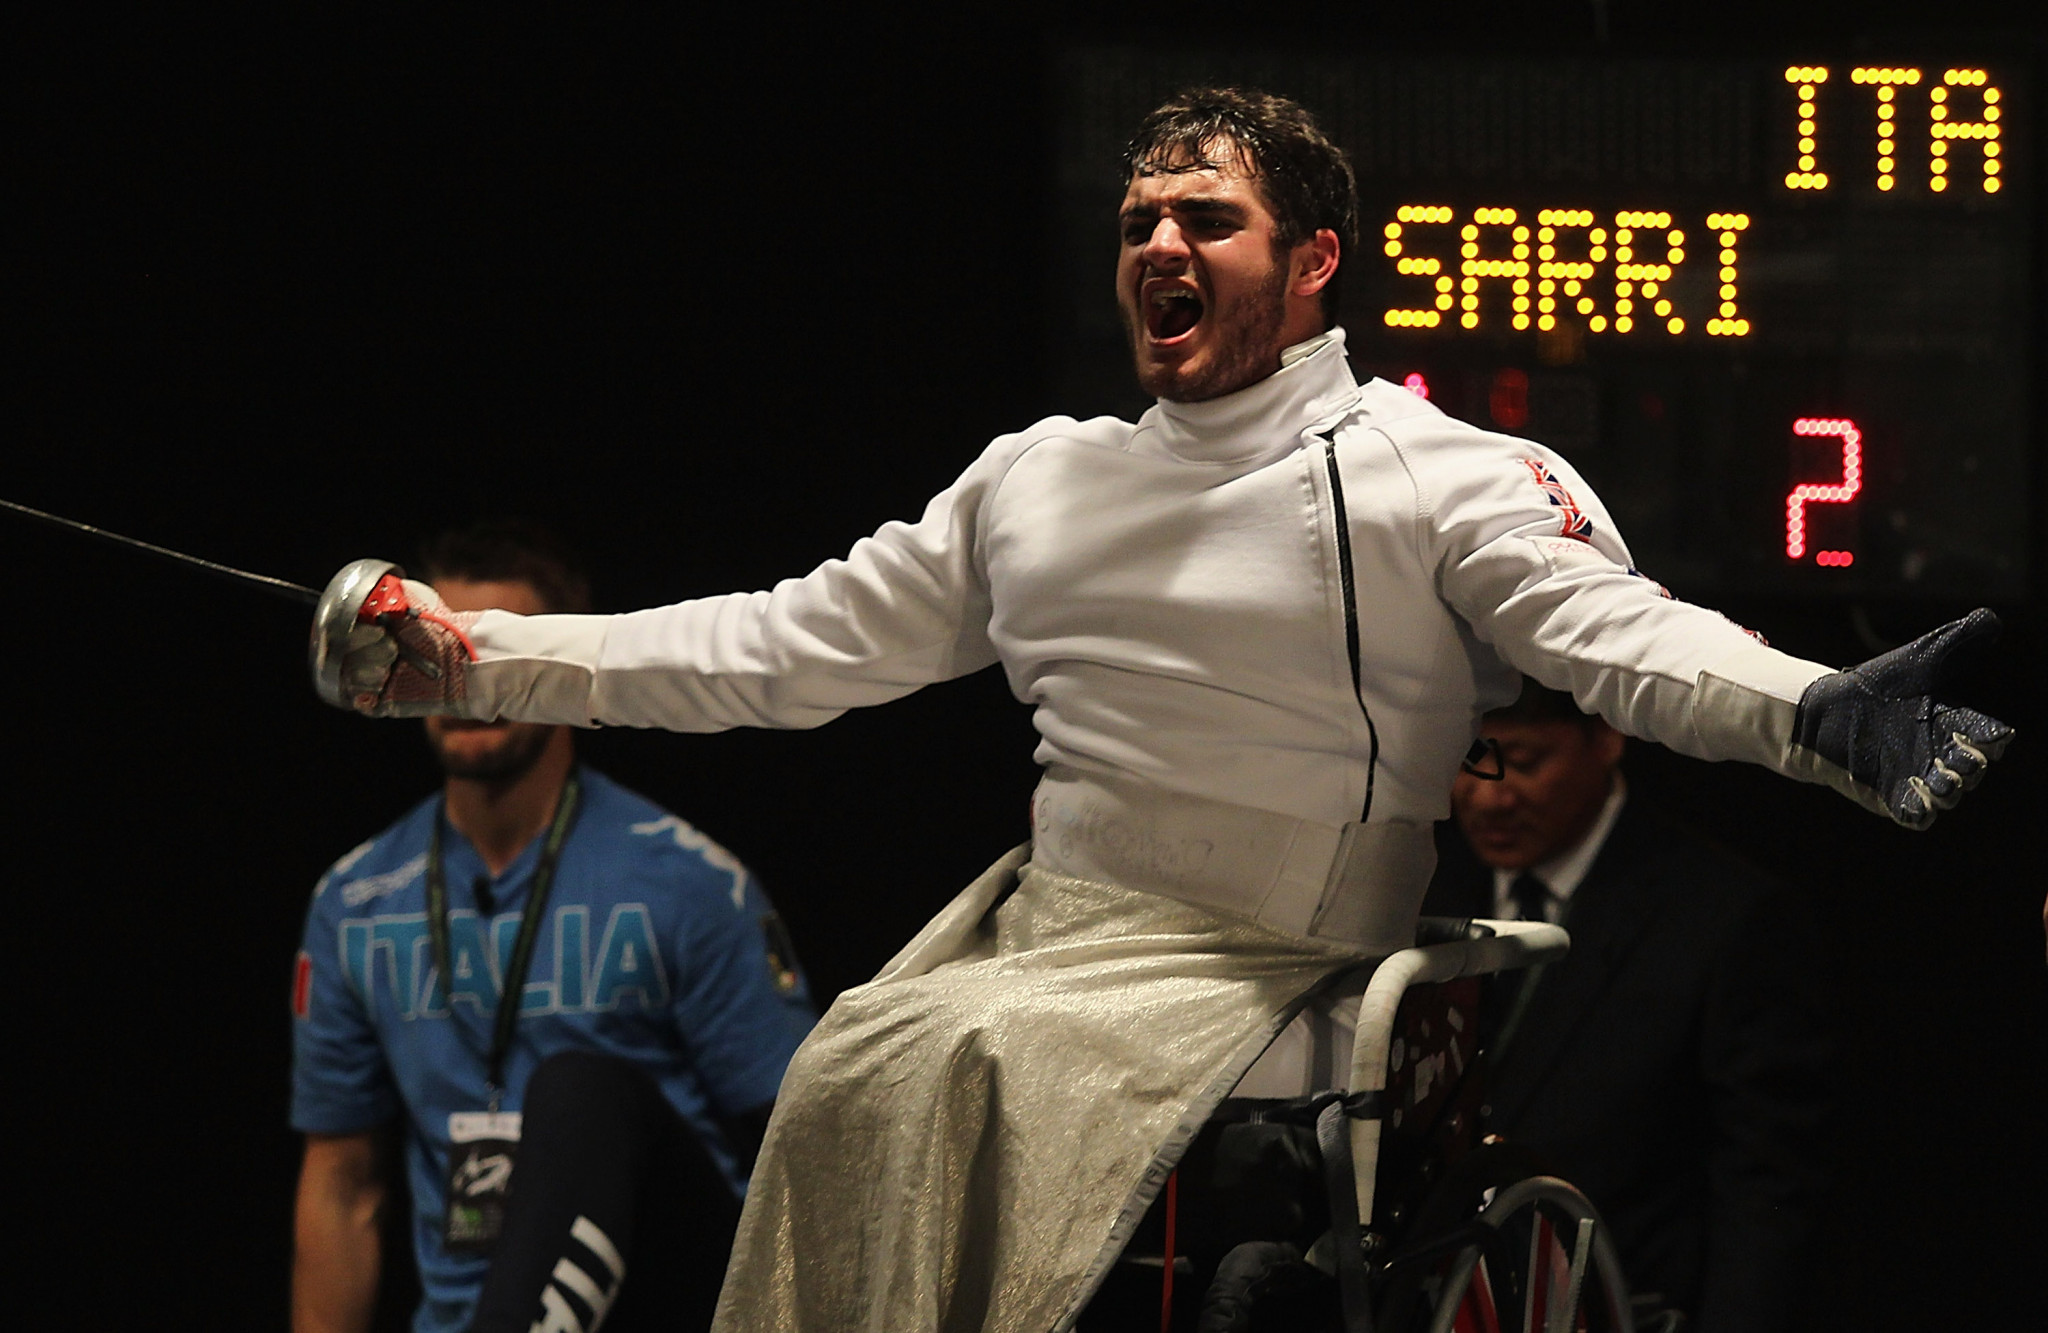 England's Dimitri Coutya struck gold by beating India’s Raghavendra in the men’s wheelchair epee final ©Getty Images